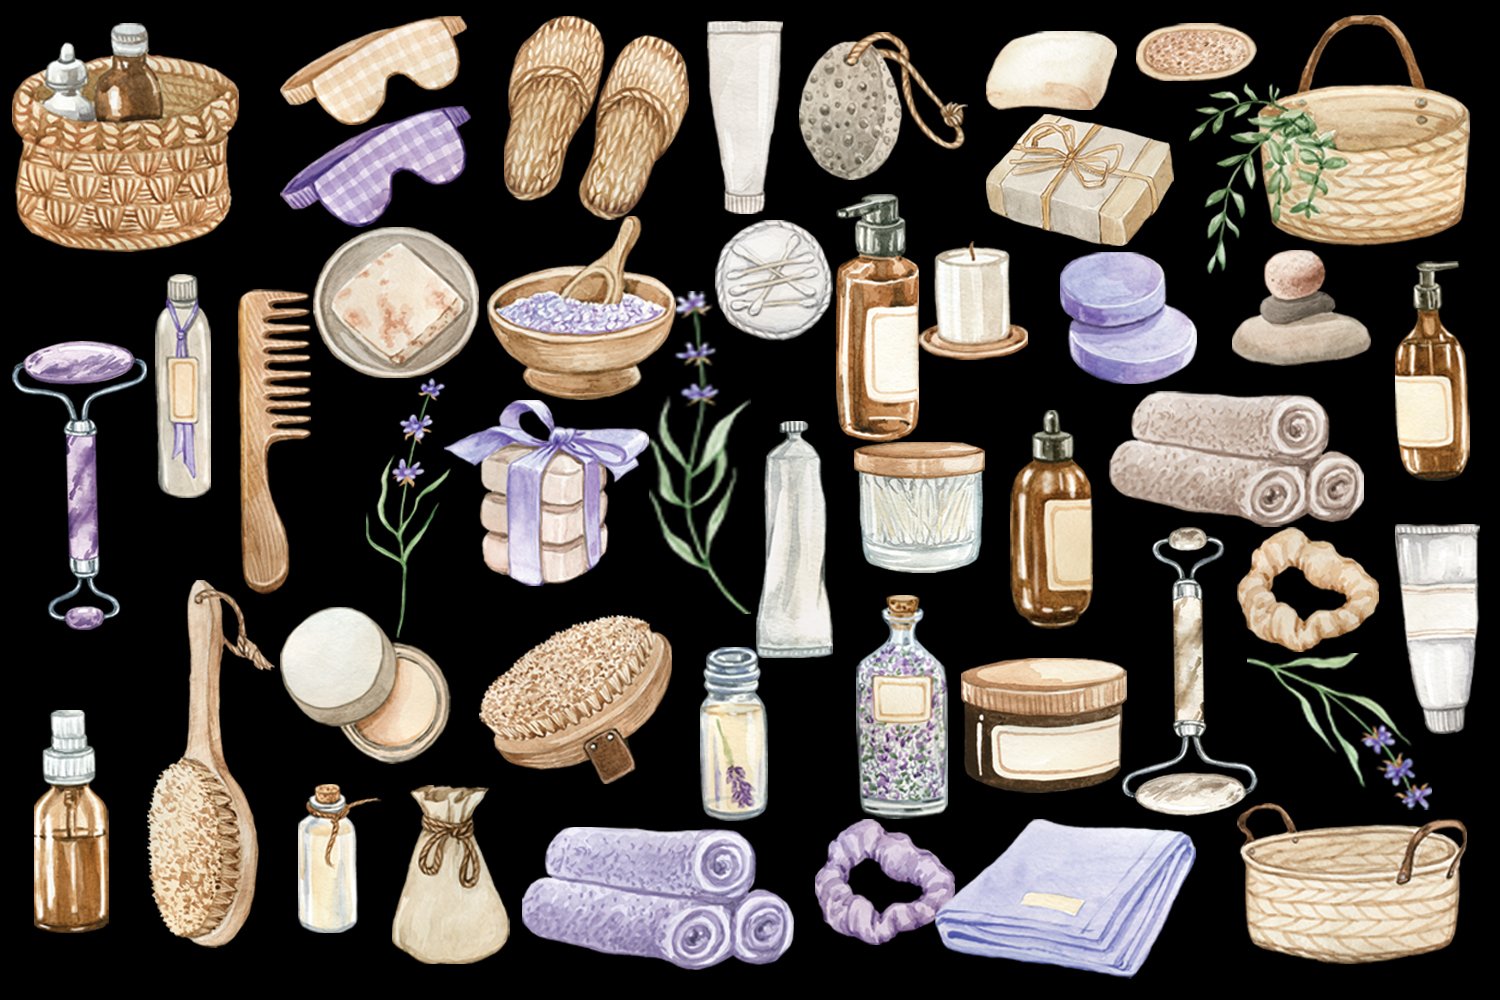 Cute spa elements on the black background.